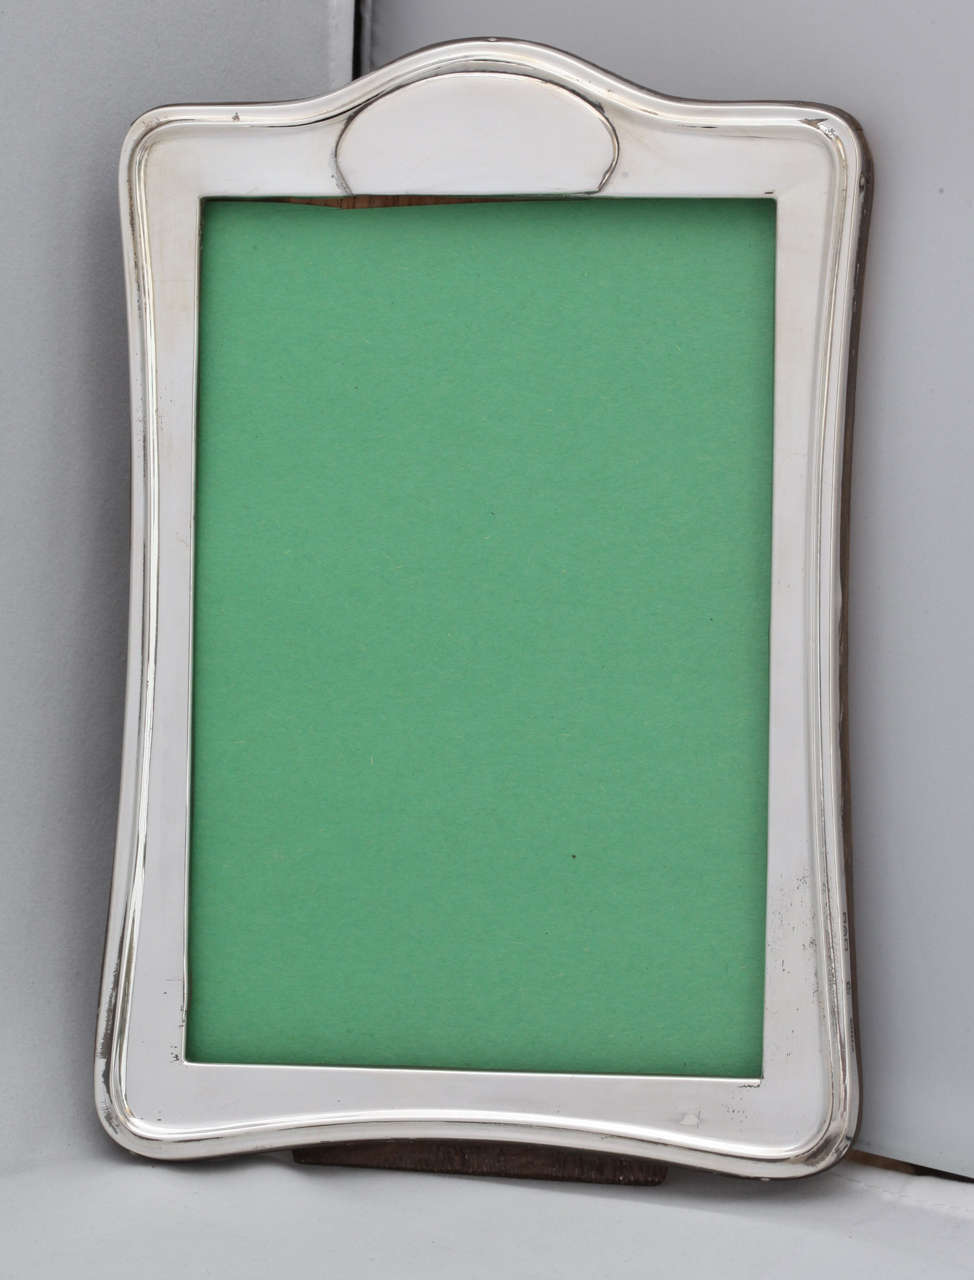 Edwardian, sterling silver picture frame, Chester, England, 1917, James Deakin & William Deakin - makers. Wood backed. Measures: 8